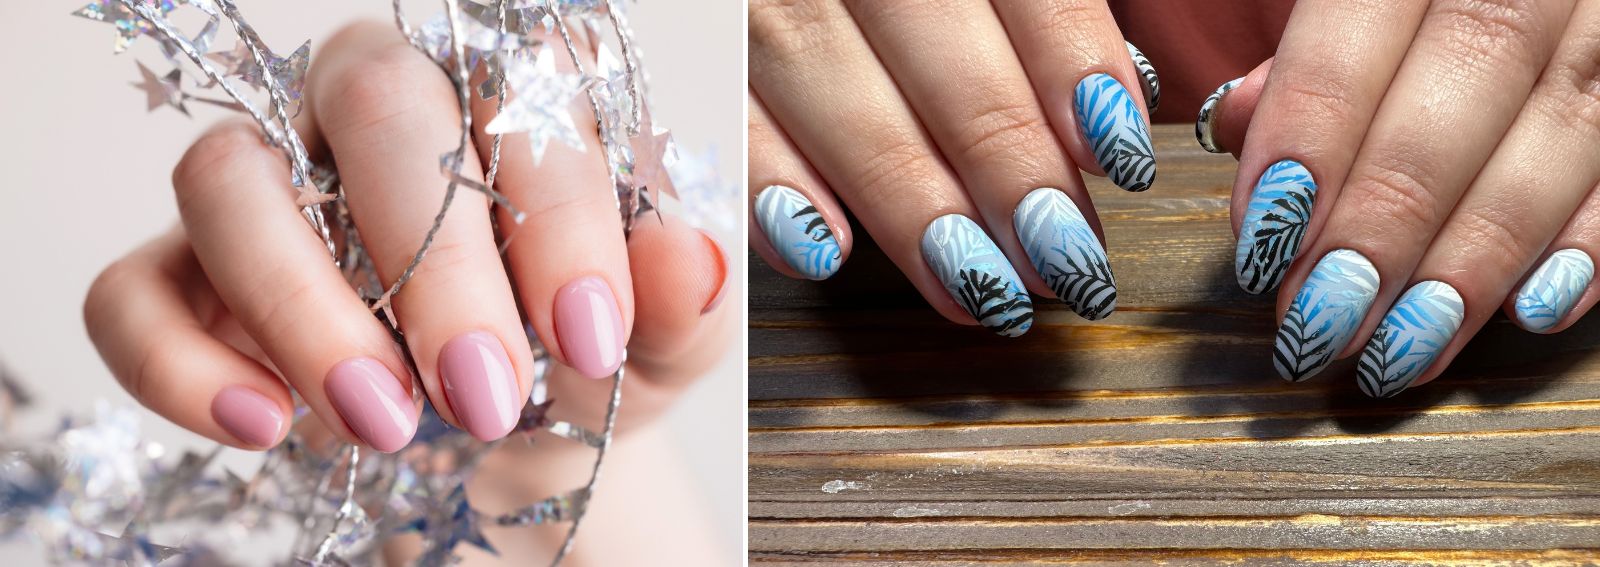 20 Aesthetic Nail Art Designs to Try This Winter